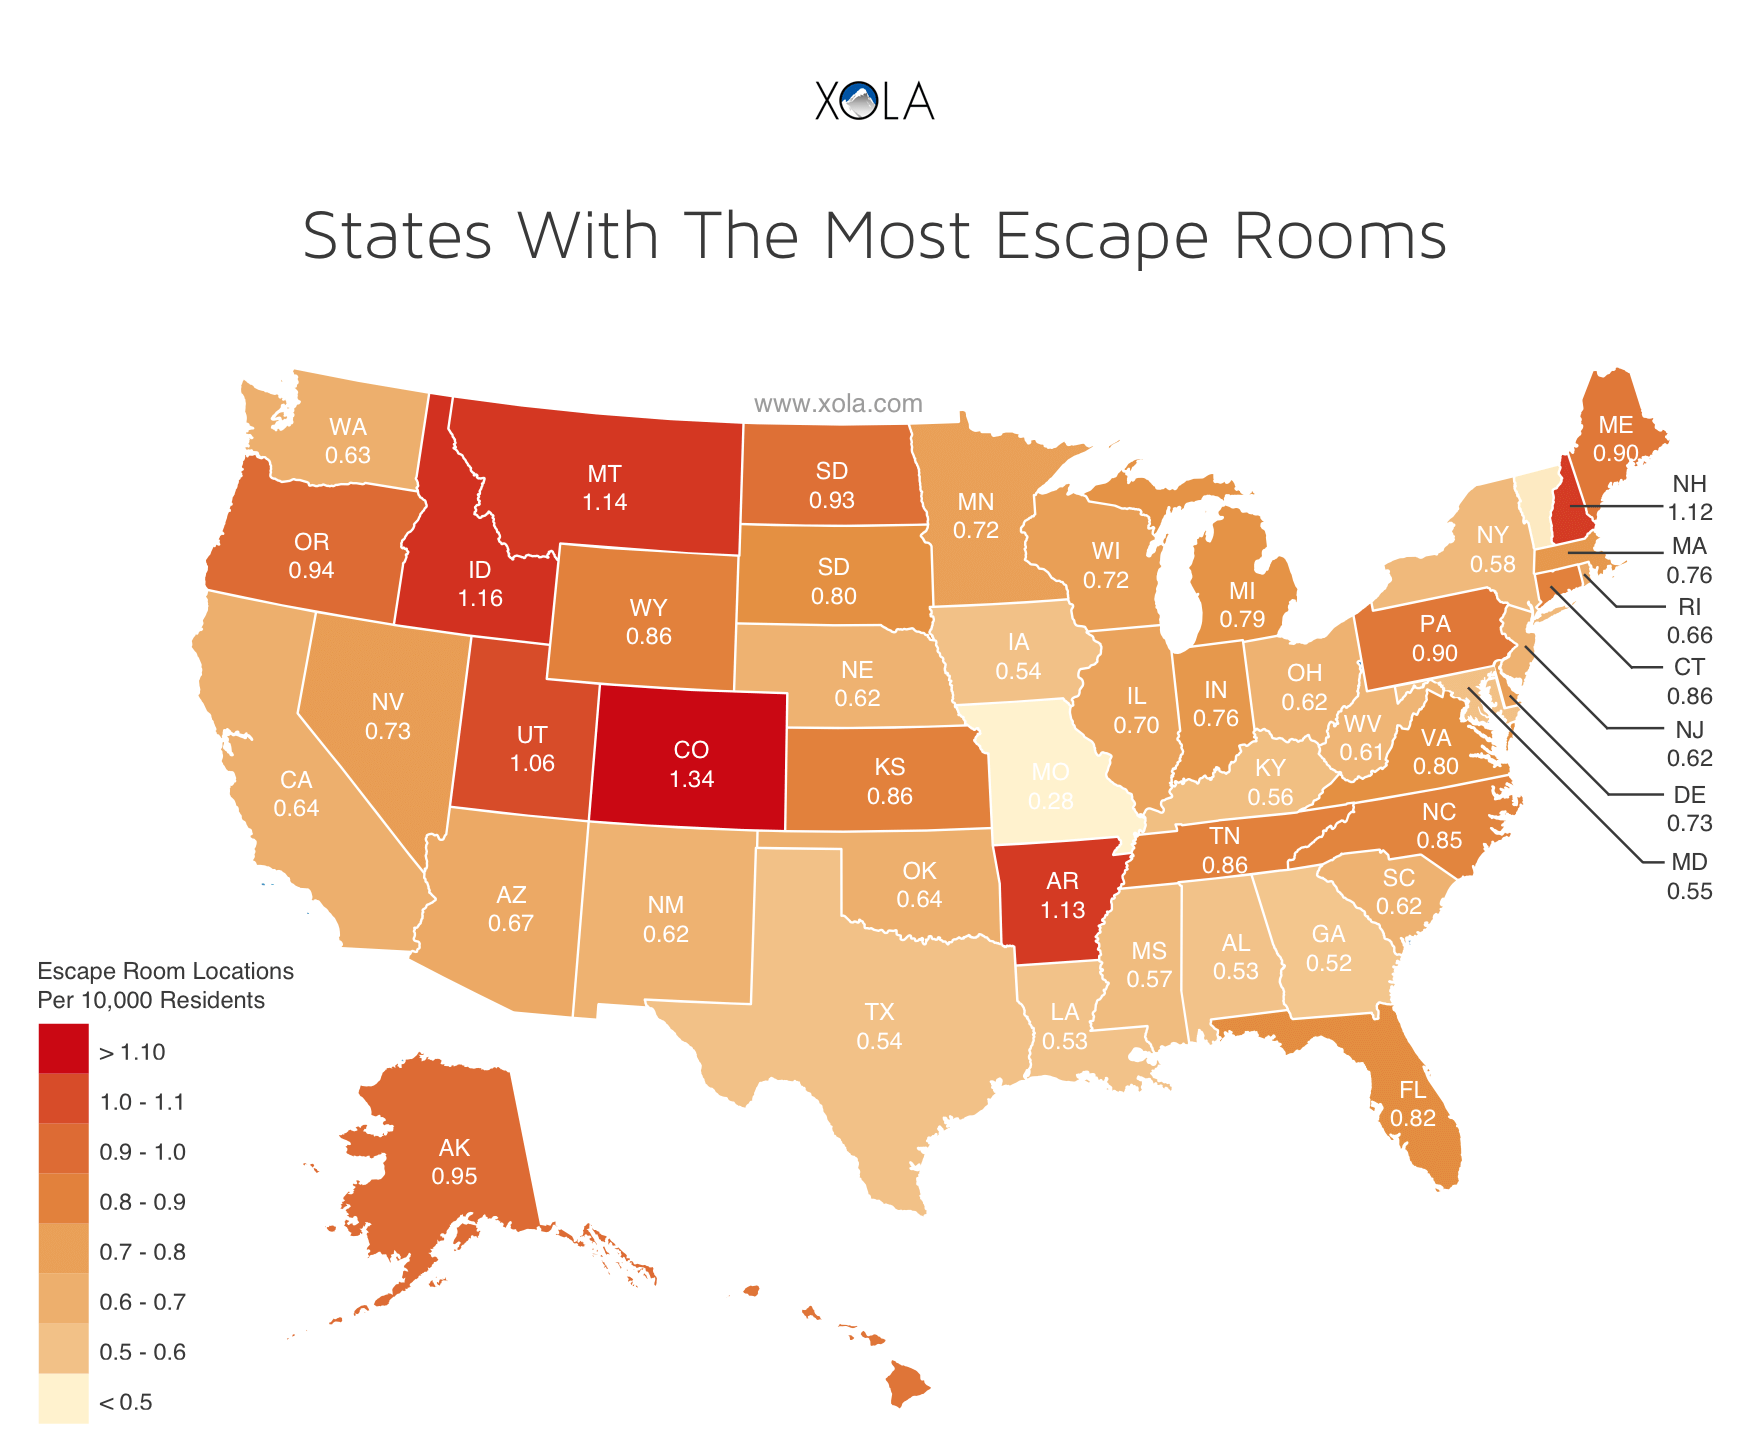 States With The Most Escape Rooms